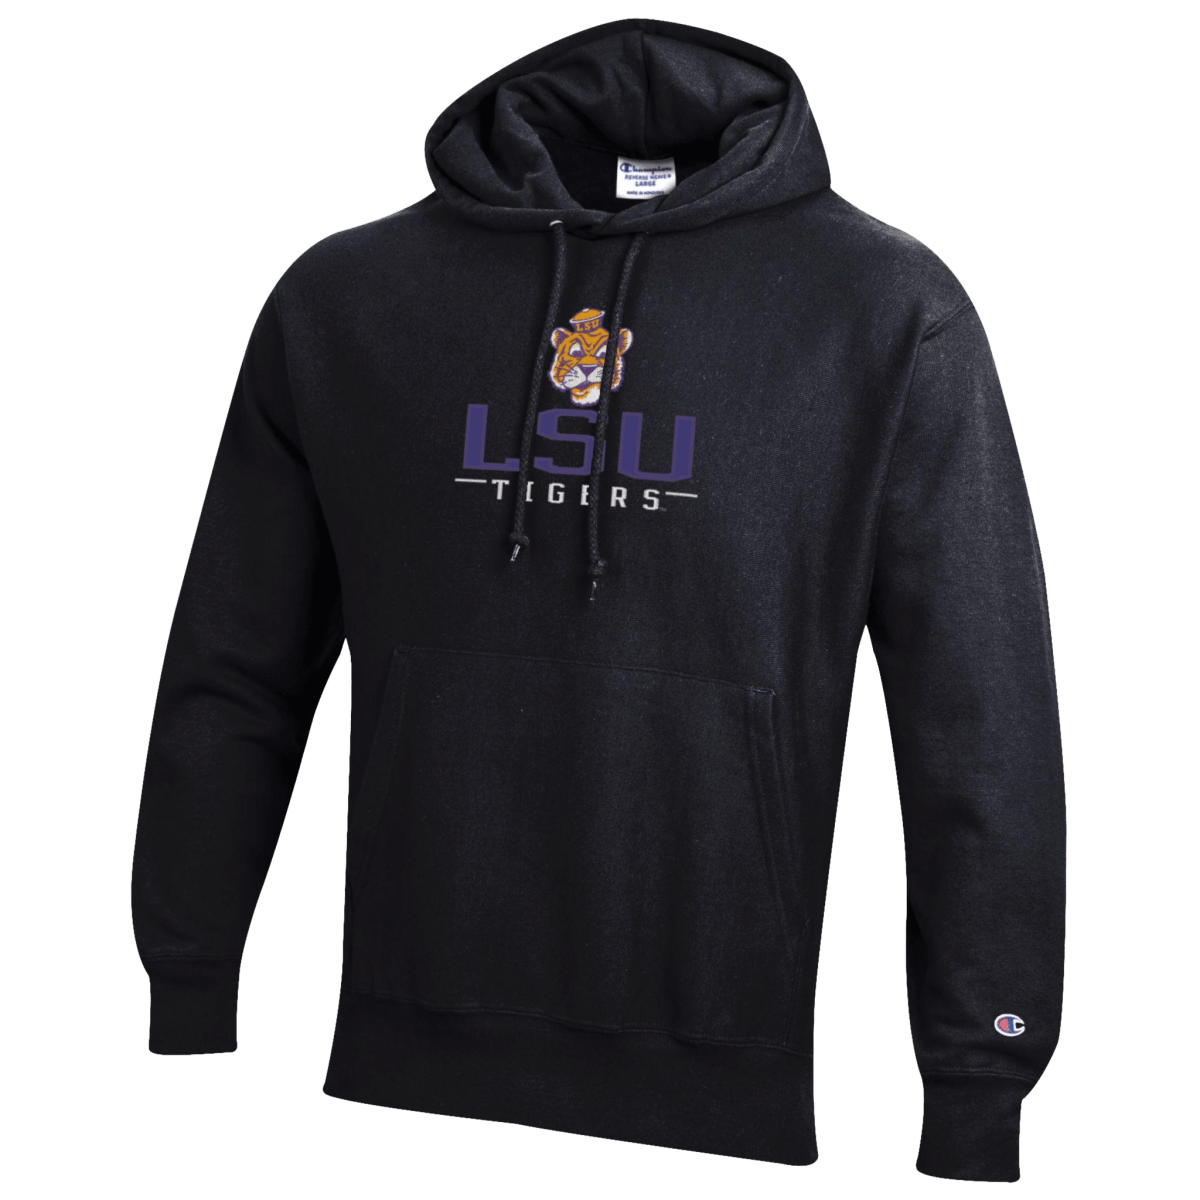 Louisiana State University Collegiate Marks Embroidered Hoodie - Shop B-Unlimited